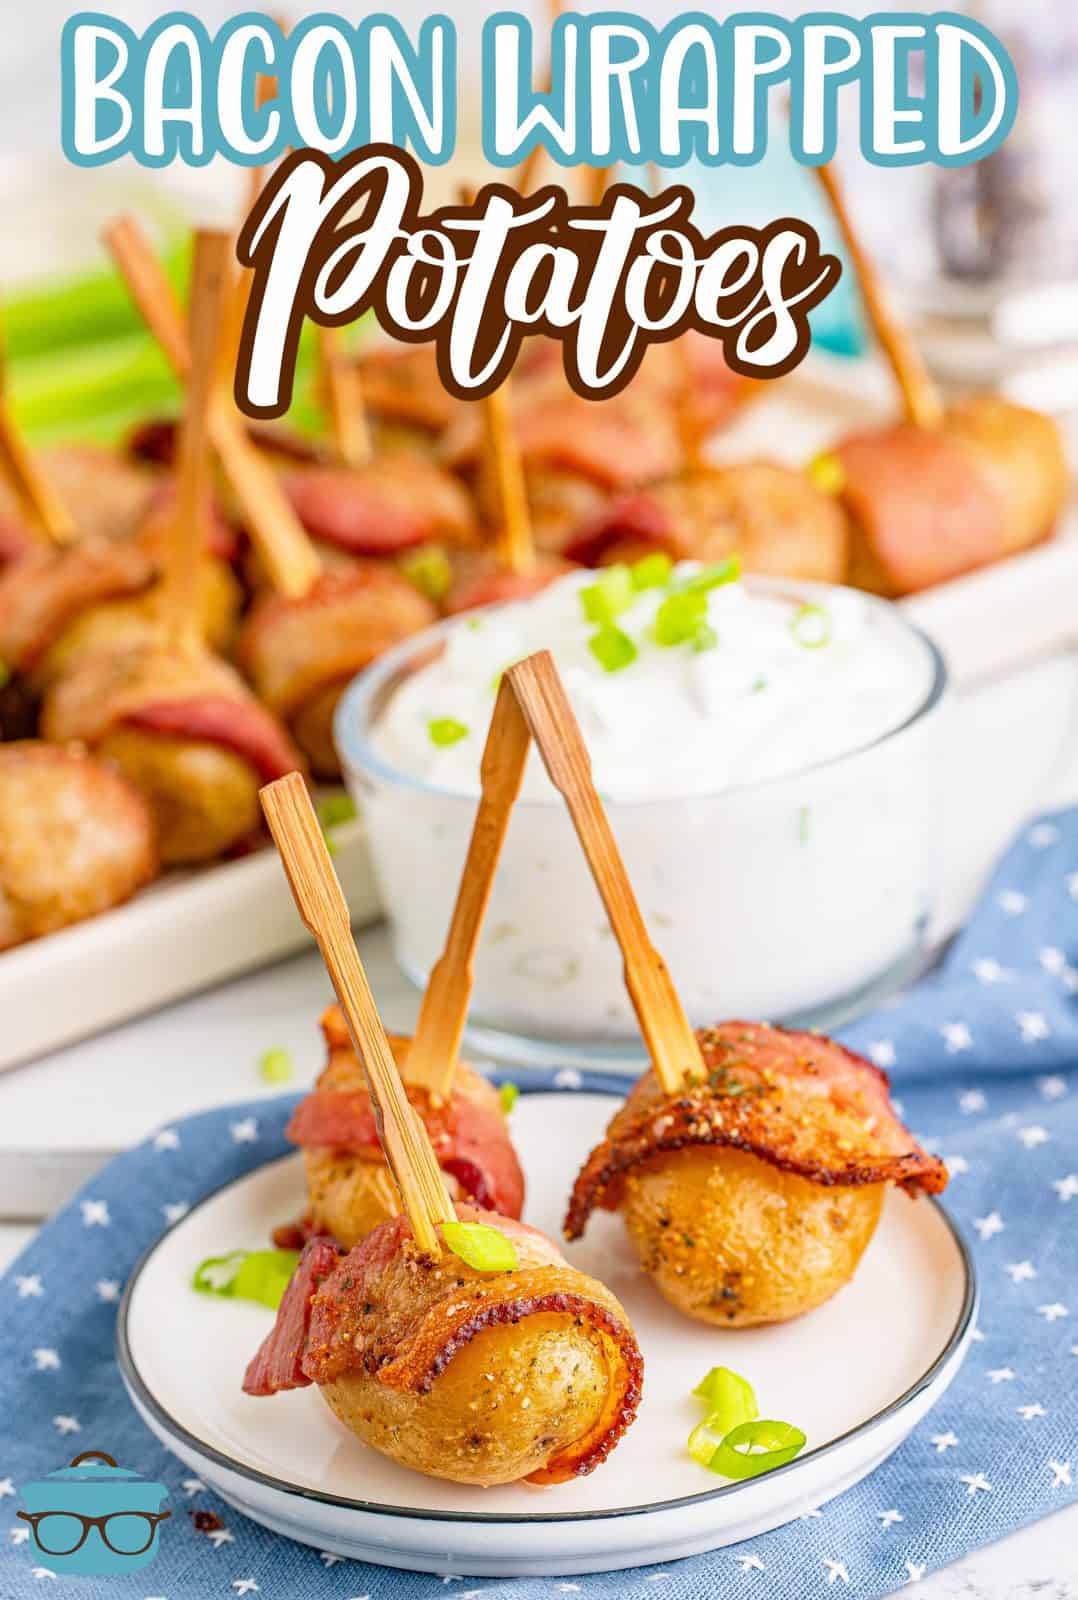 three bacon wrapped potatoes with toothpicks on a white plate in front of a tray holding several more bacon wrapped potatoes.